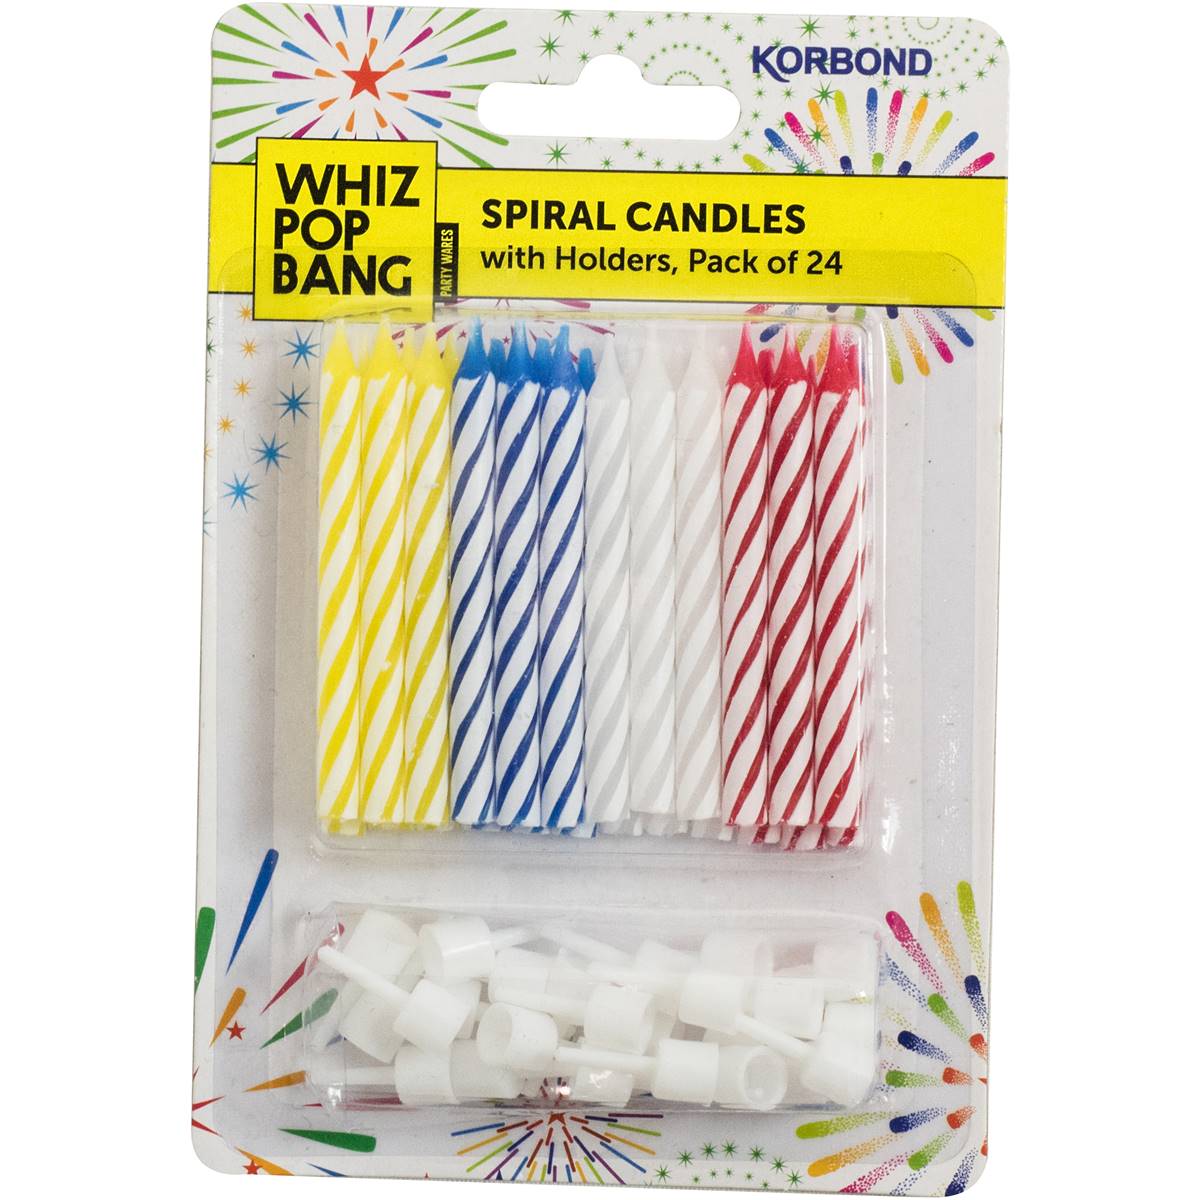 Korbond Spiral Candles With Holders 24 pack